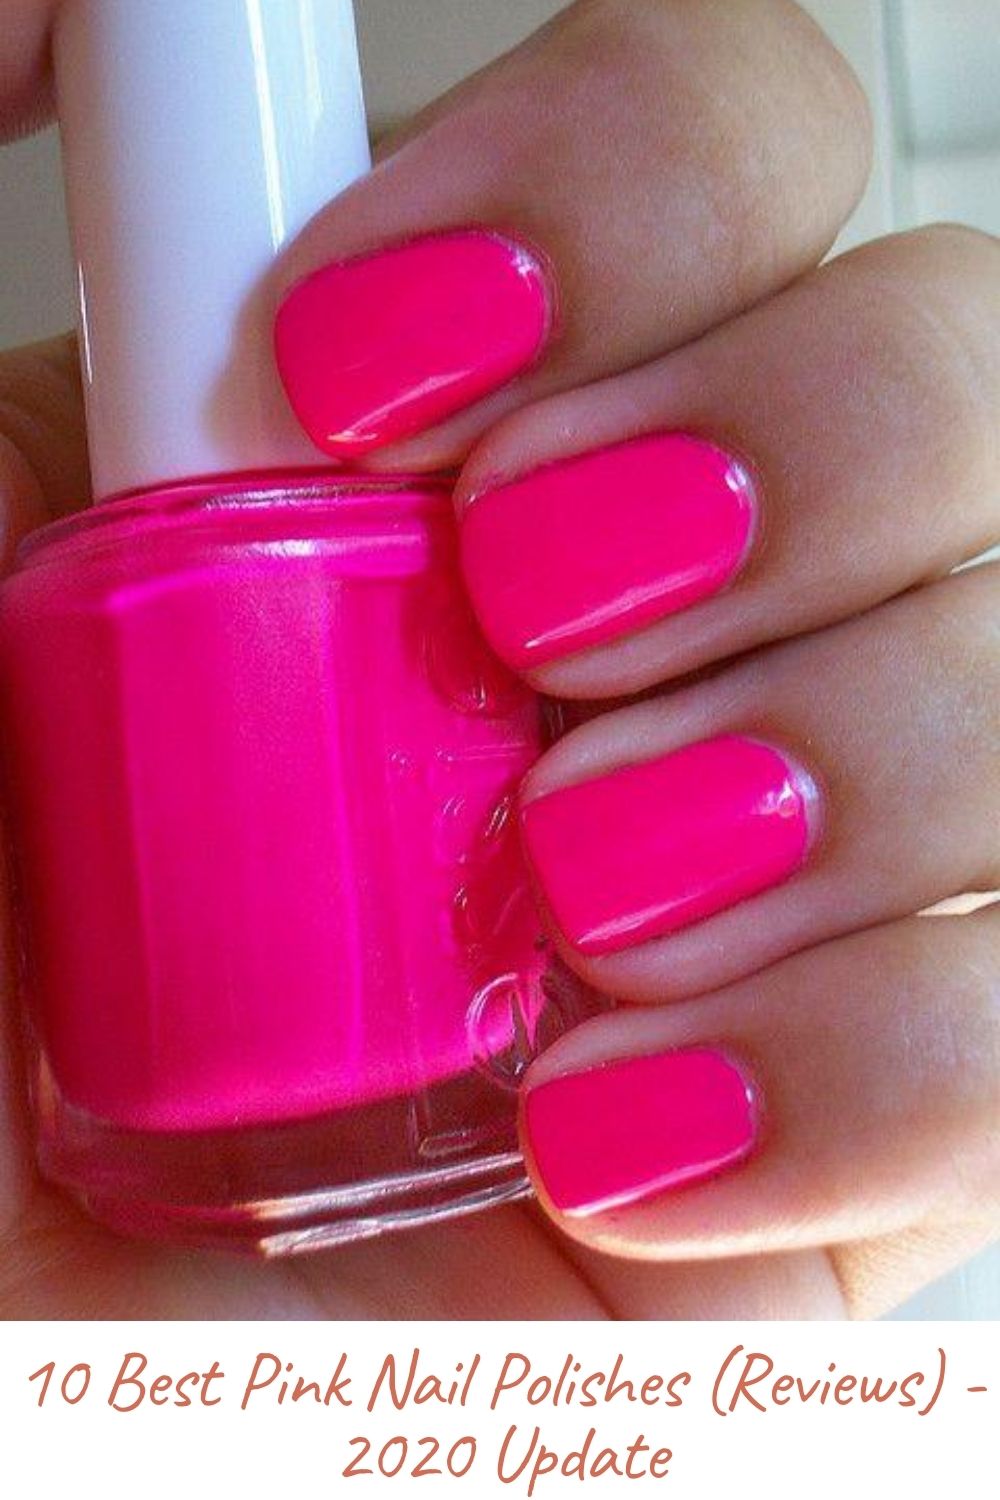 10 Best Pink Nail Polishes (Reviews) - 2020 Update